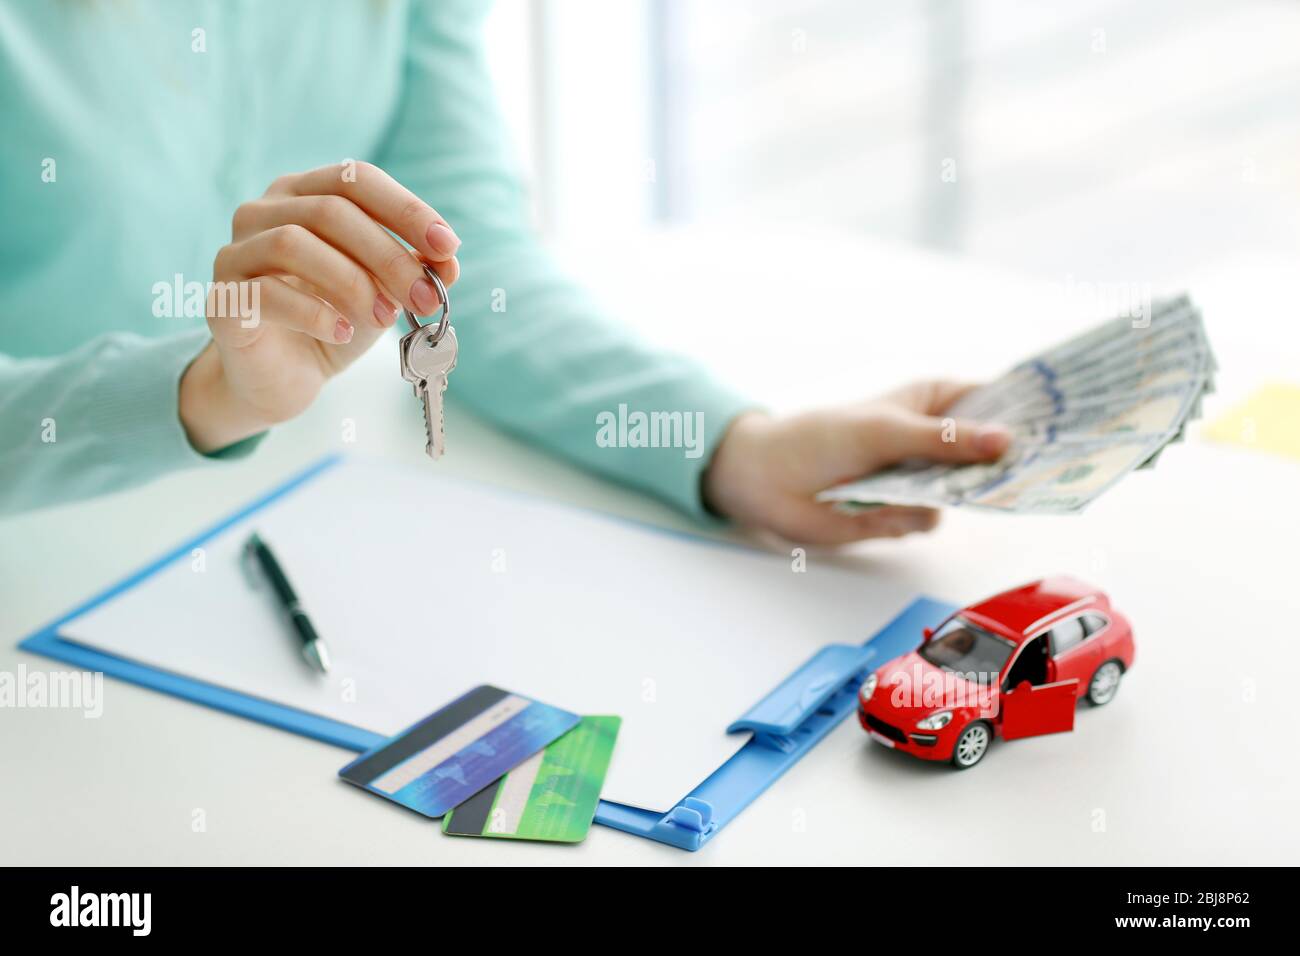 Buying  a new car concept. Hands holding money and keys. Stock Photo